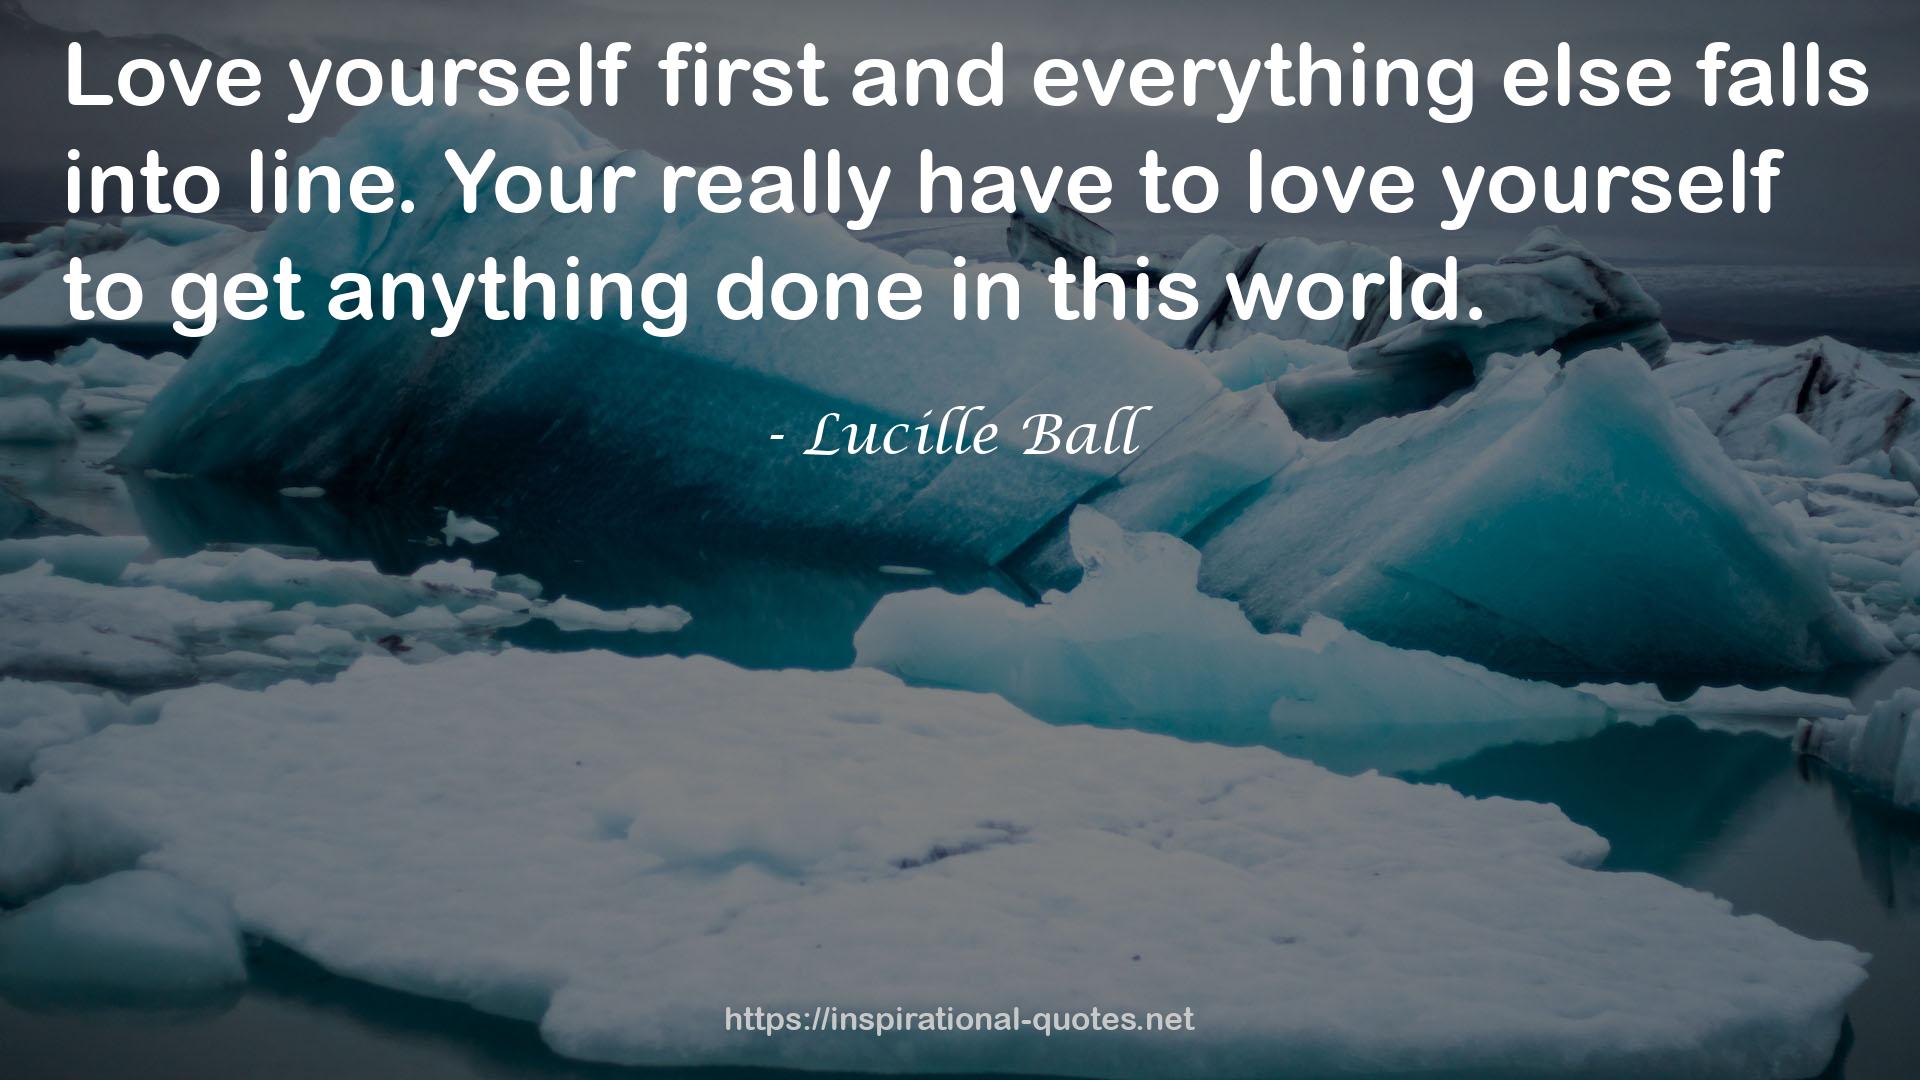 Lucille Ball QUOTES